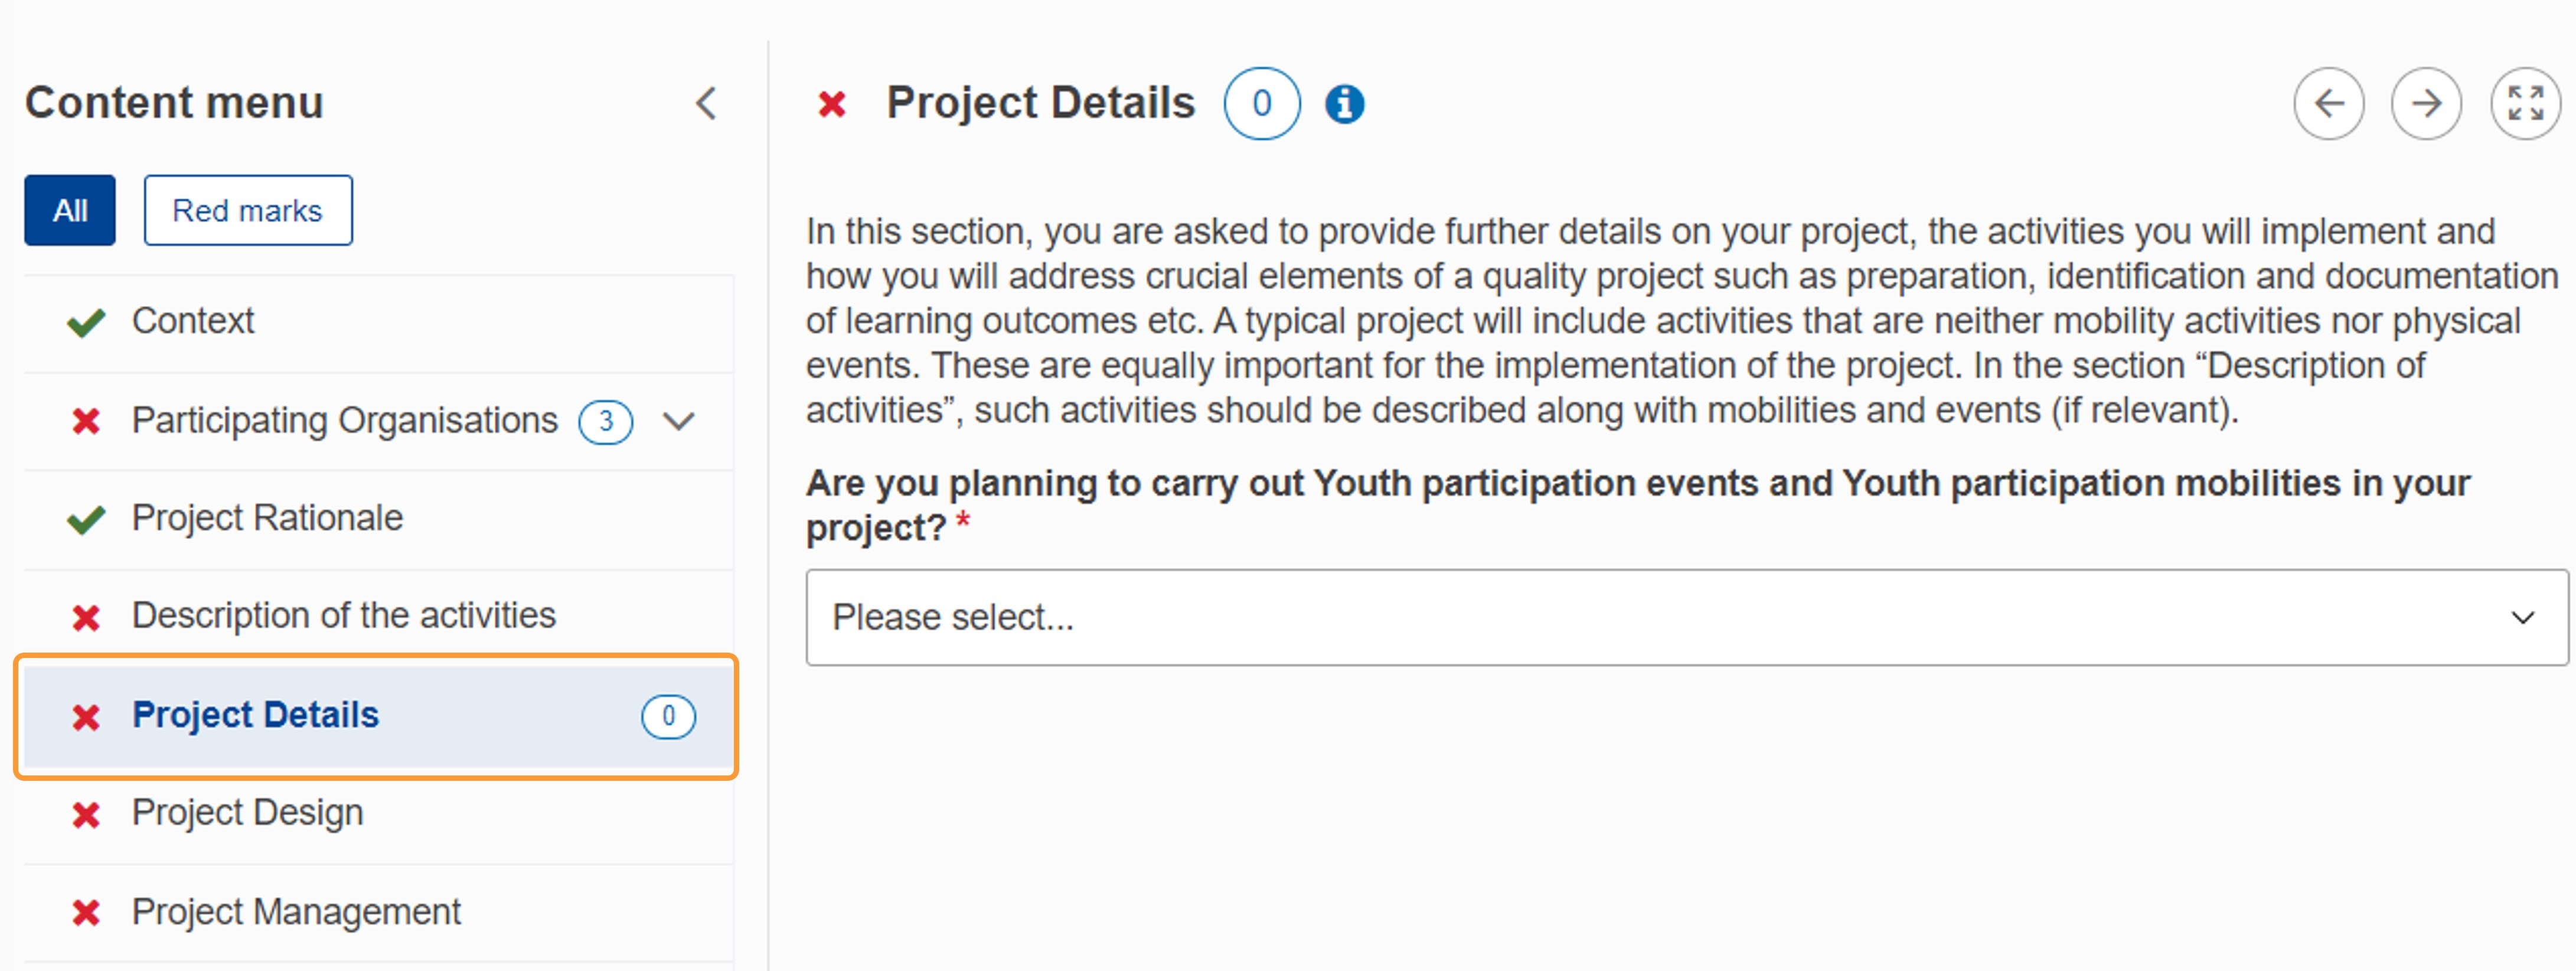 Click on Project Details from the Content menu